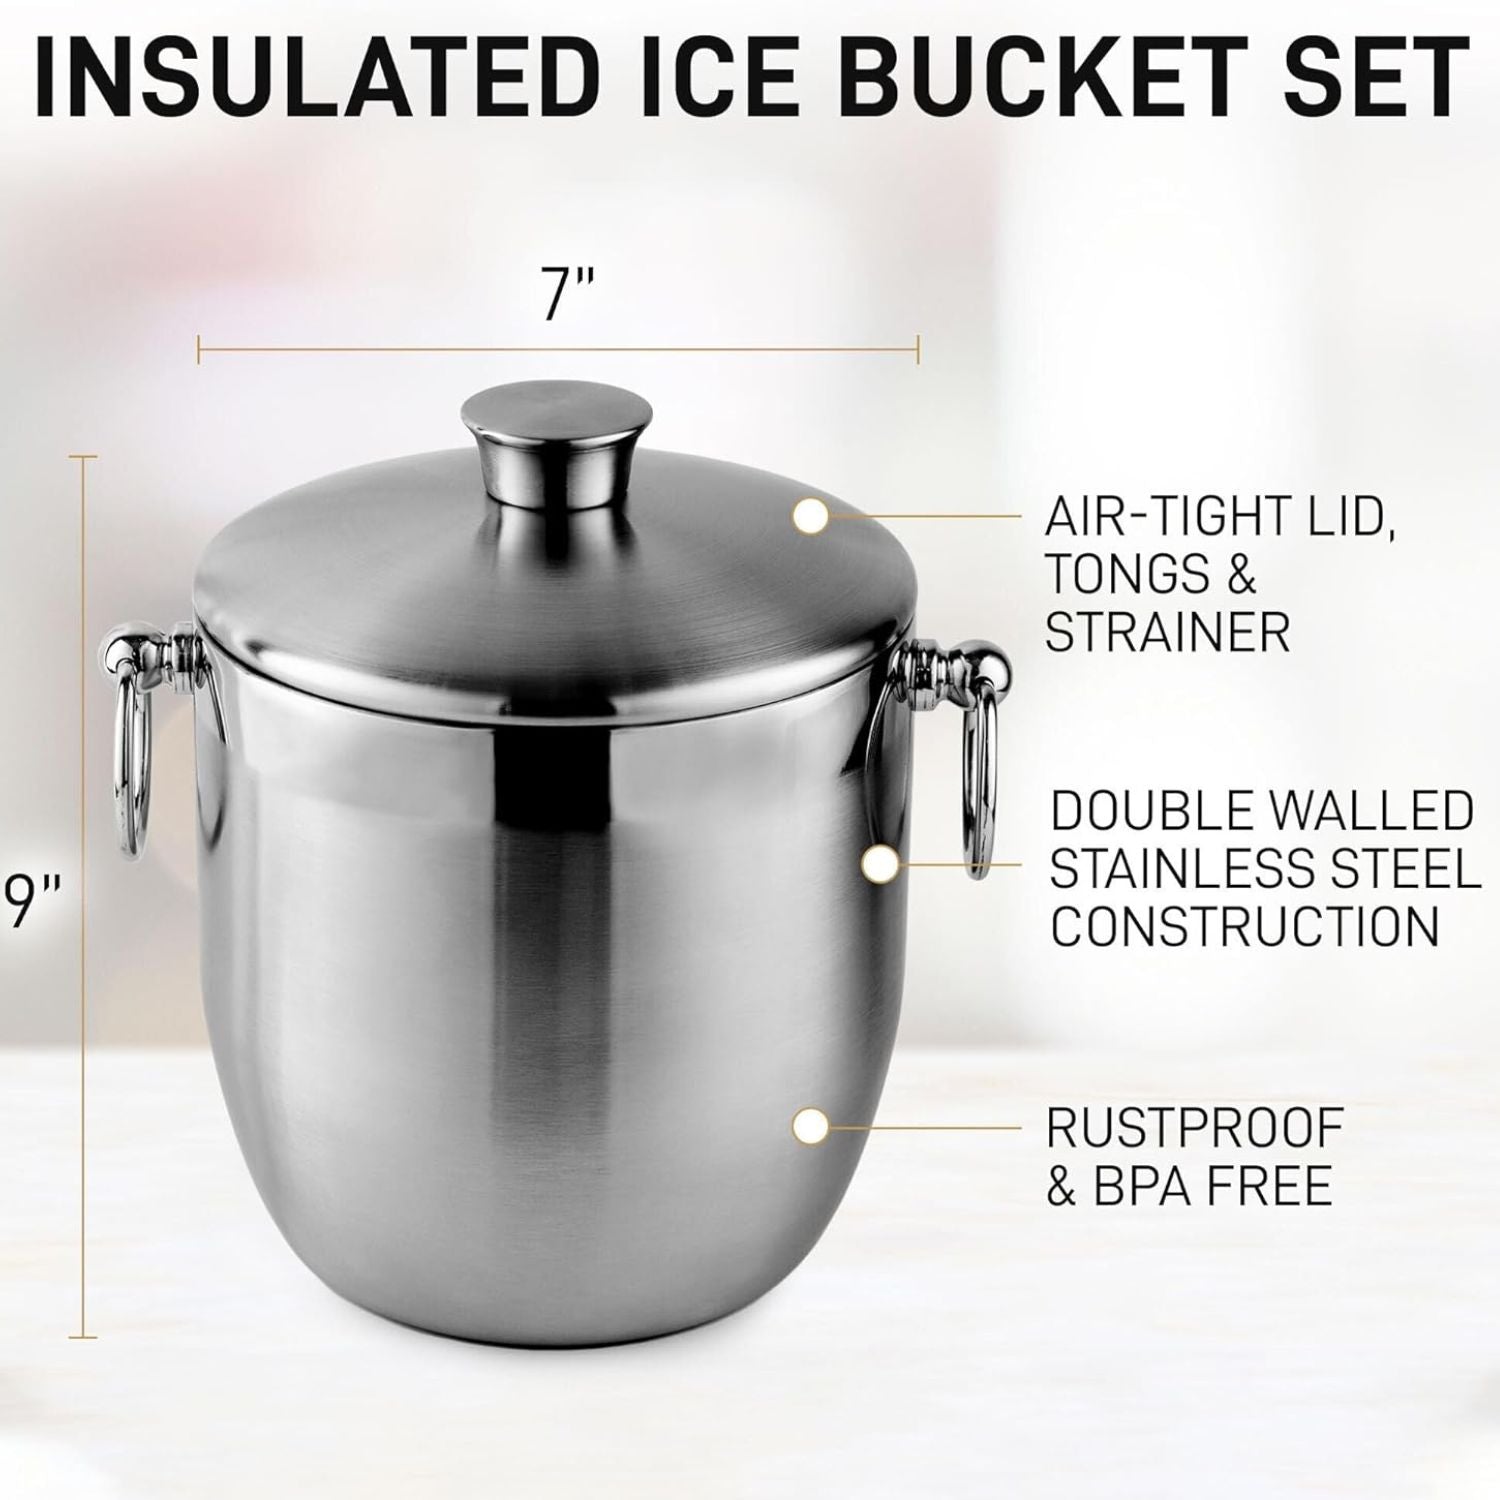 Ice Bucket With Lid, Strainer and Tongs